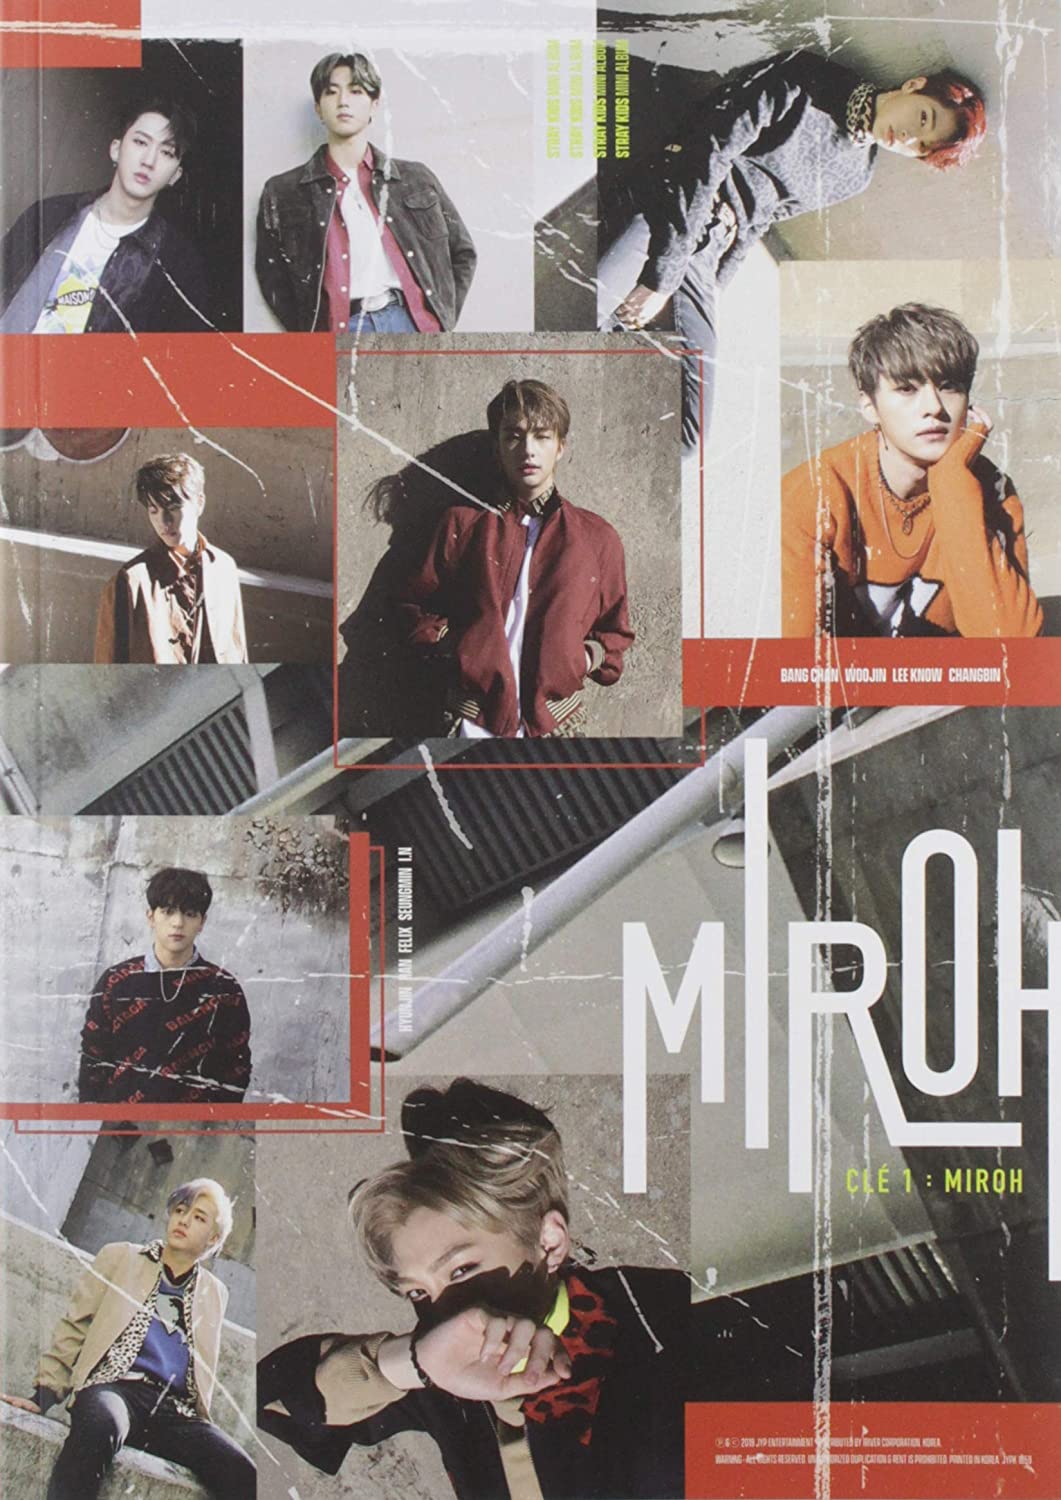 Miroh | Stray Kids, Cle 1